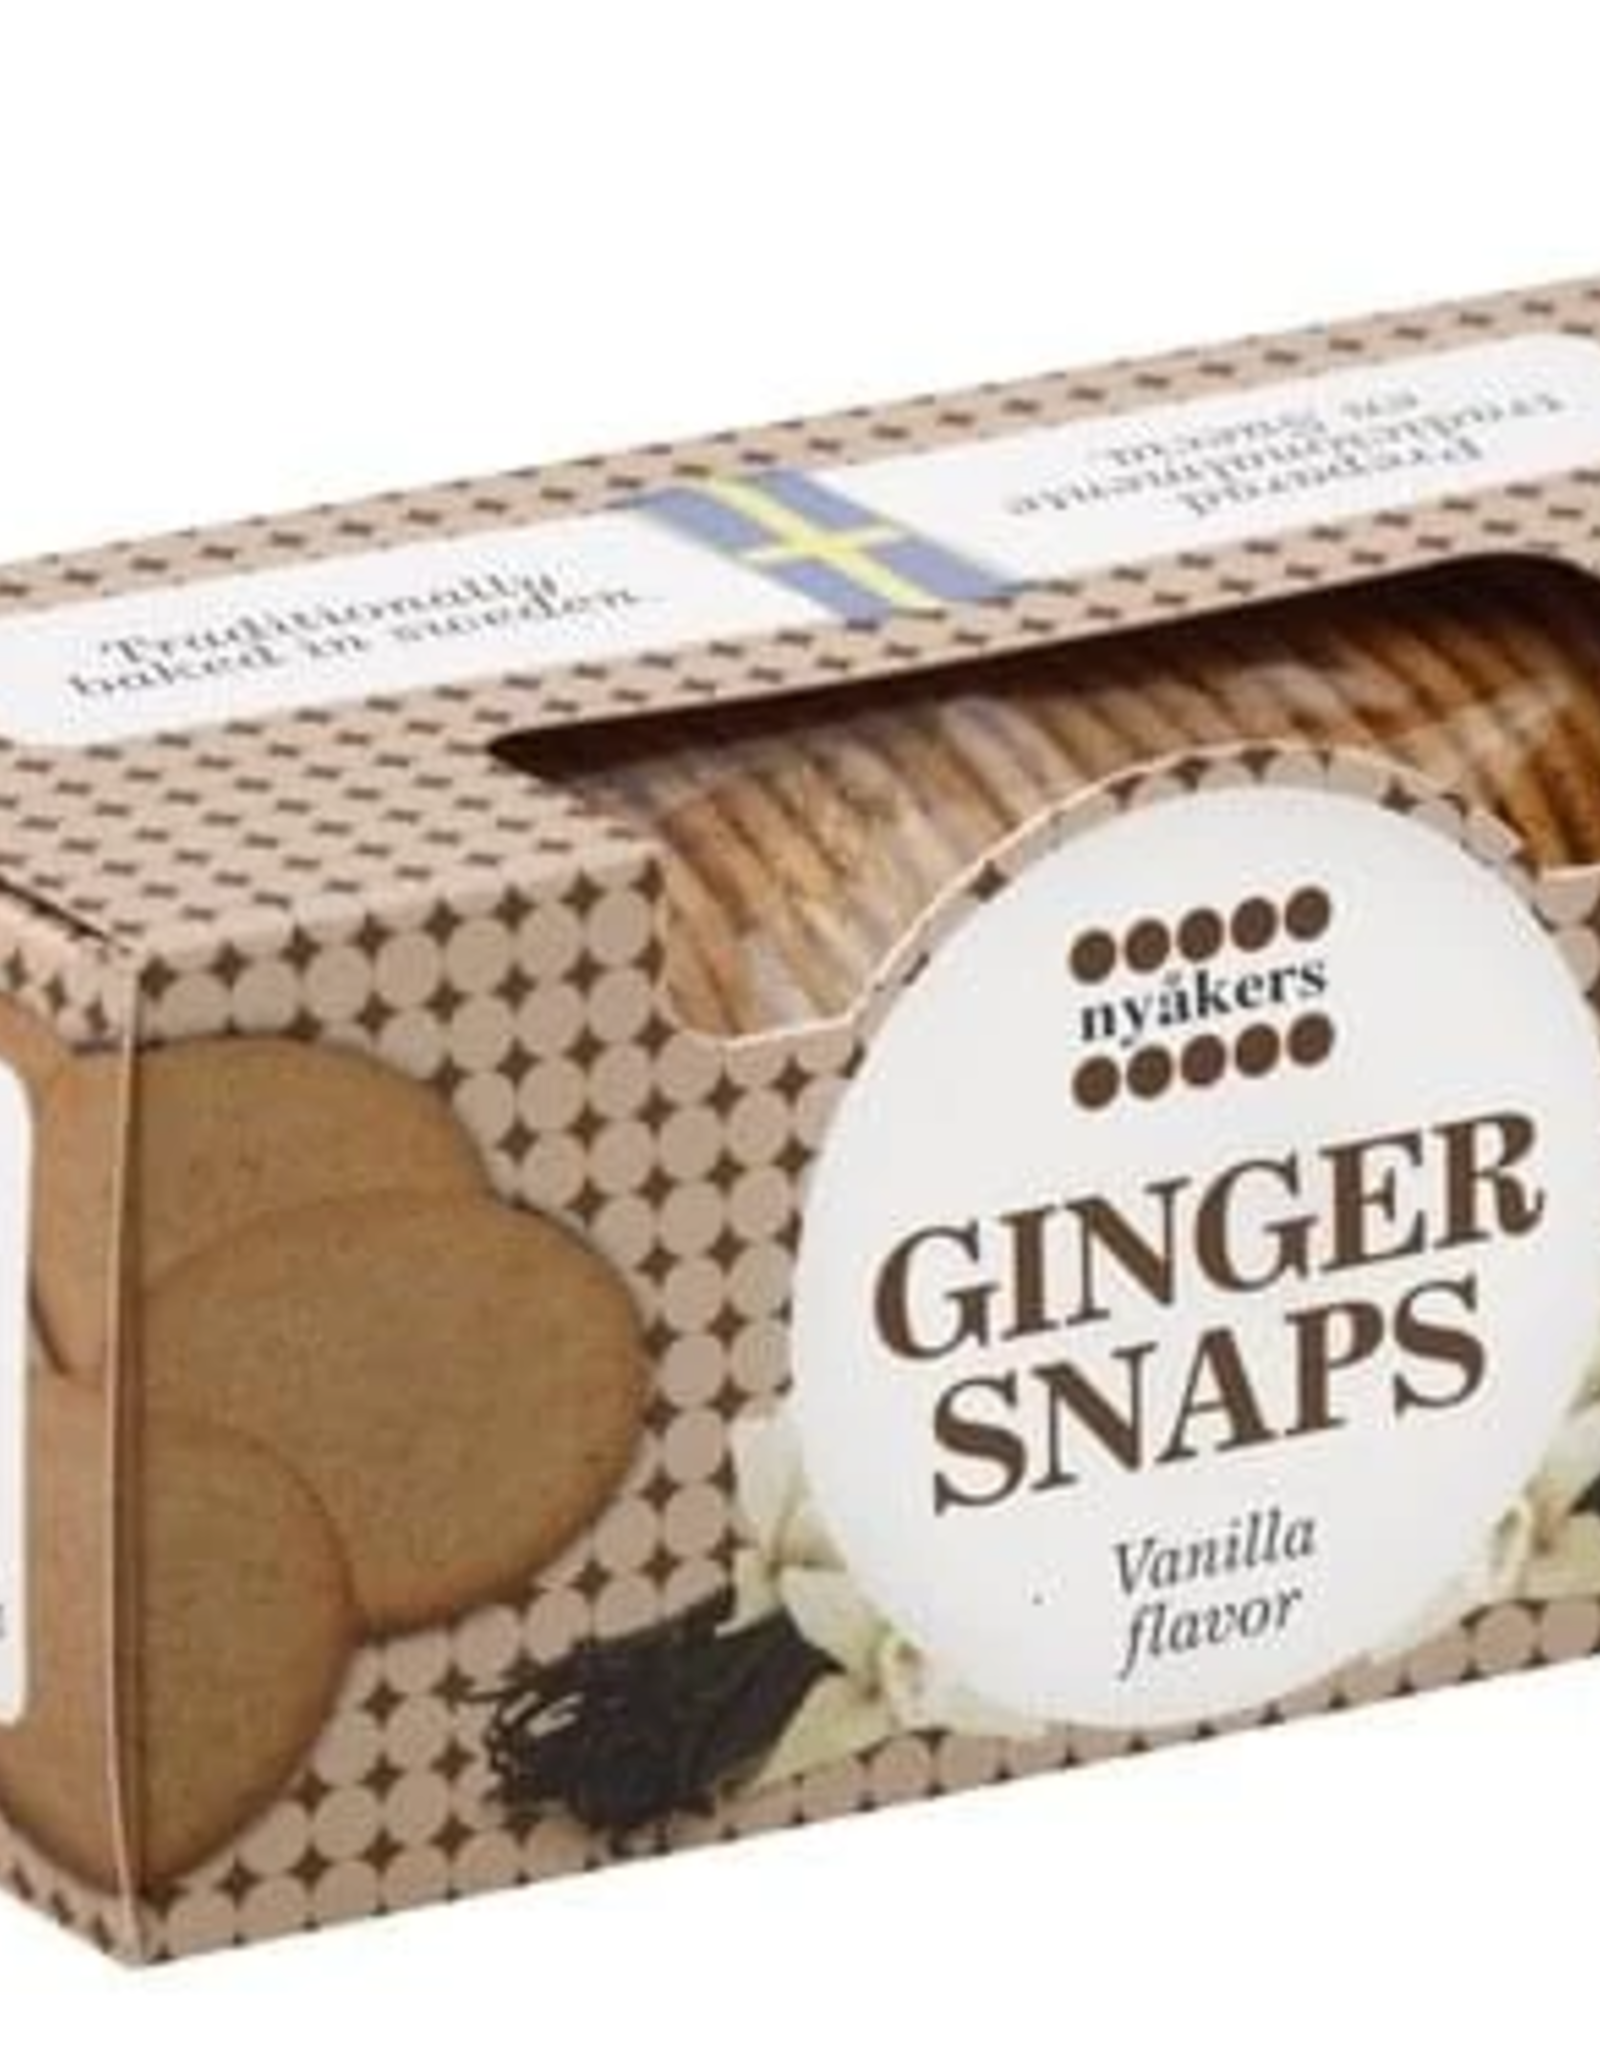 Nyakers Ginger Snap Cookies